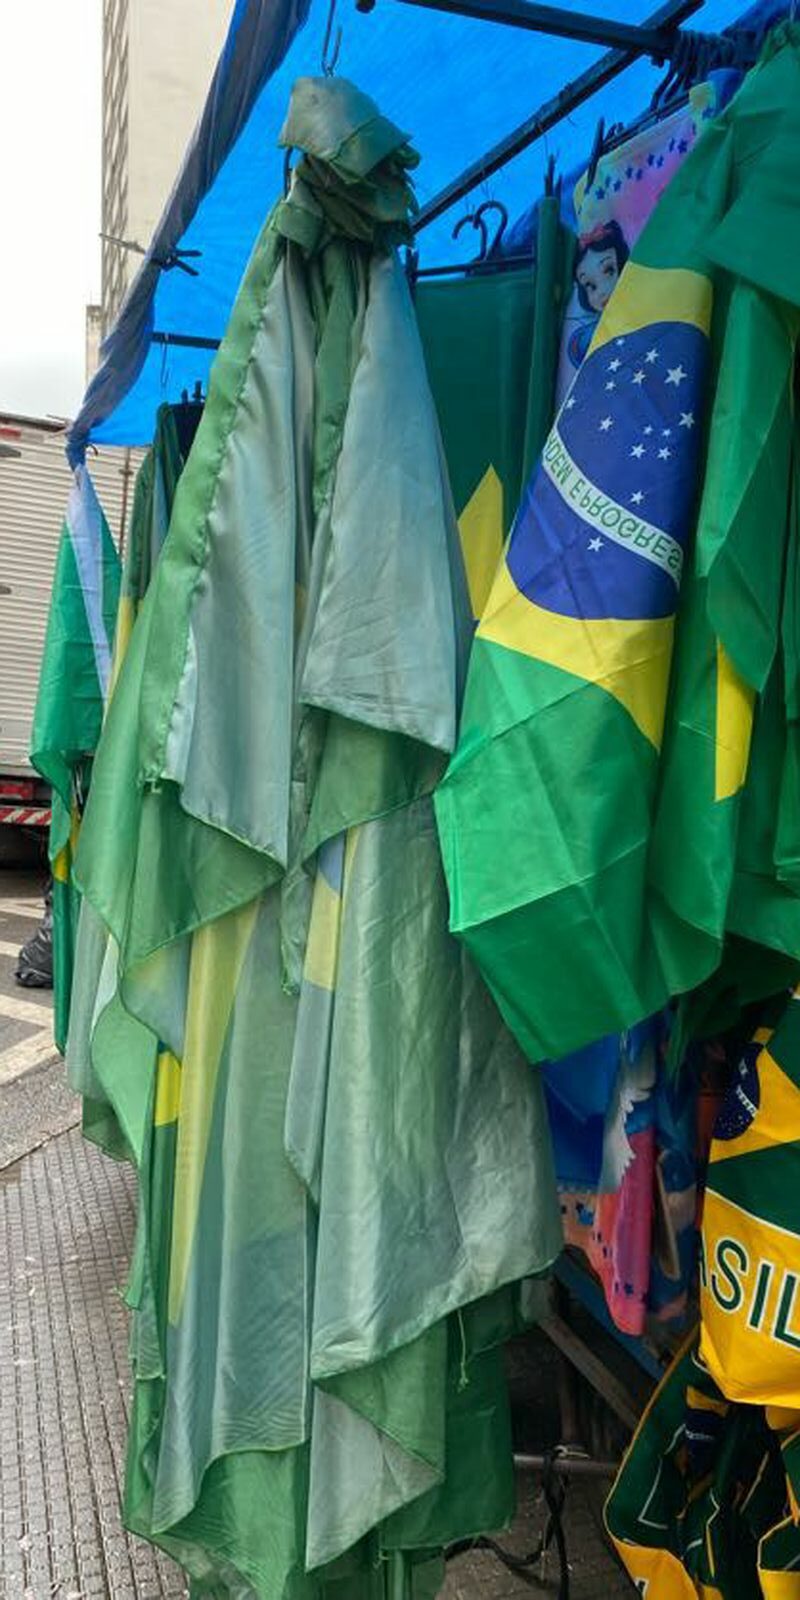 Merchants hope to increase revenue with items for the World Cup